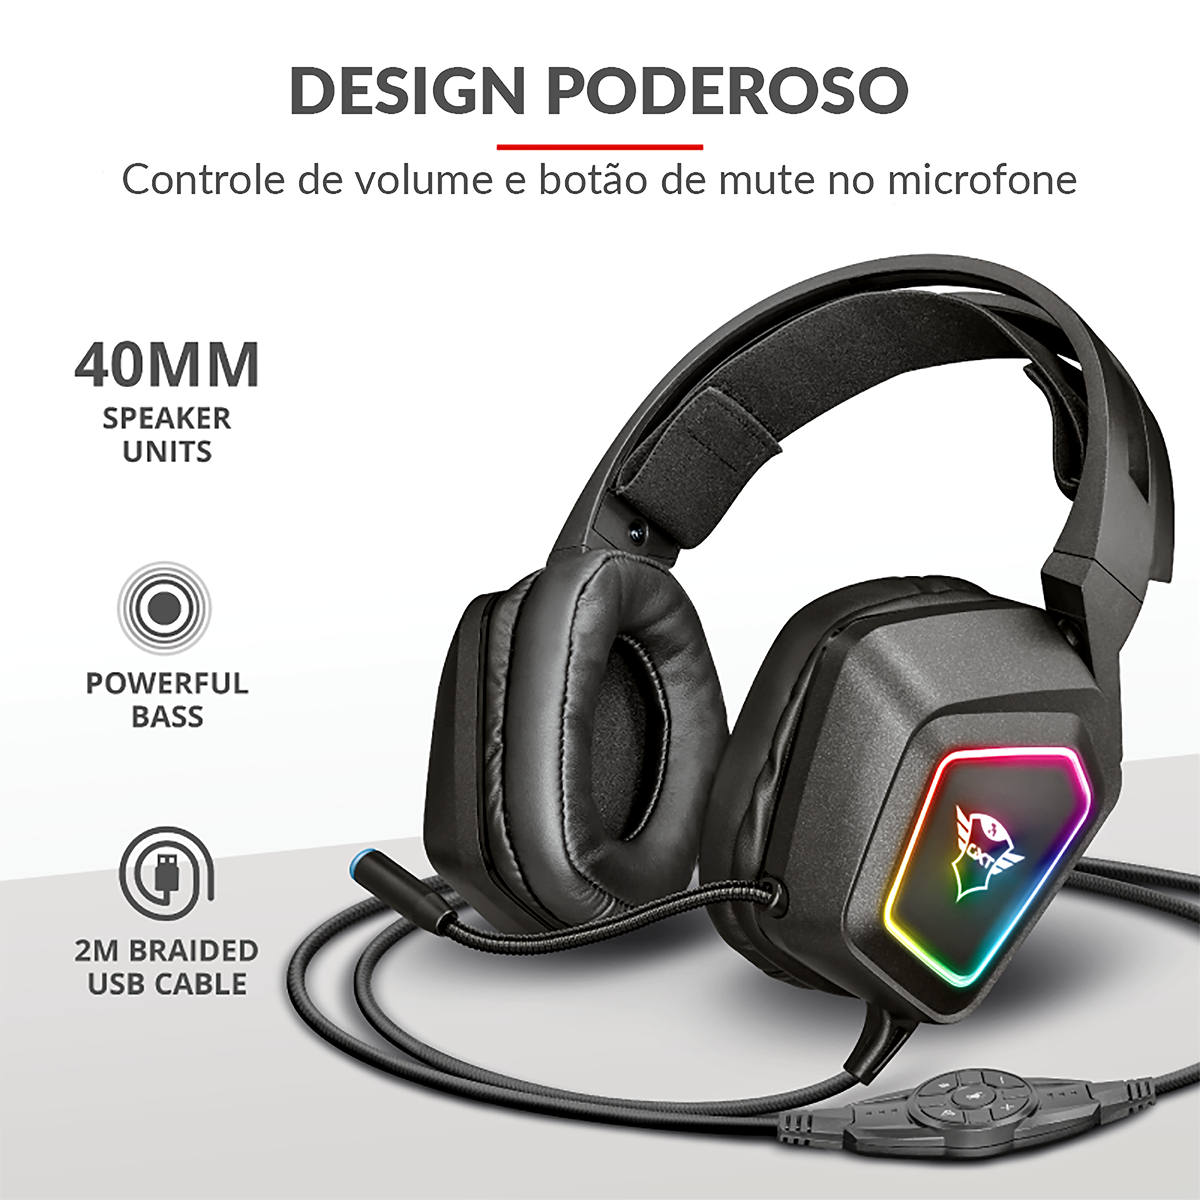 Headset Gamer 7.1 Surround Alta Fidelidade Sonora e Graves Potentes RGB Trust Blizz GXT-450 Gaming